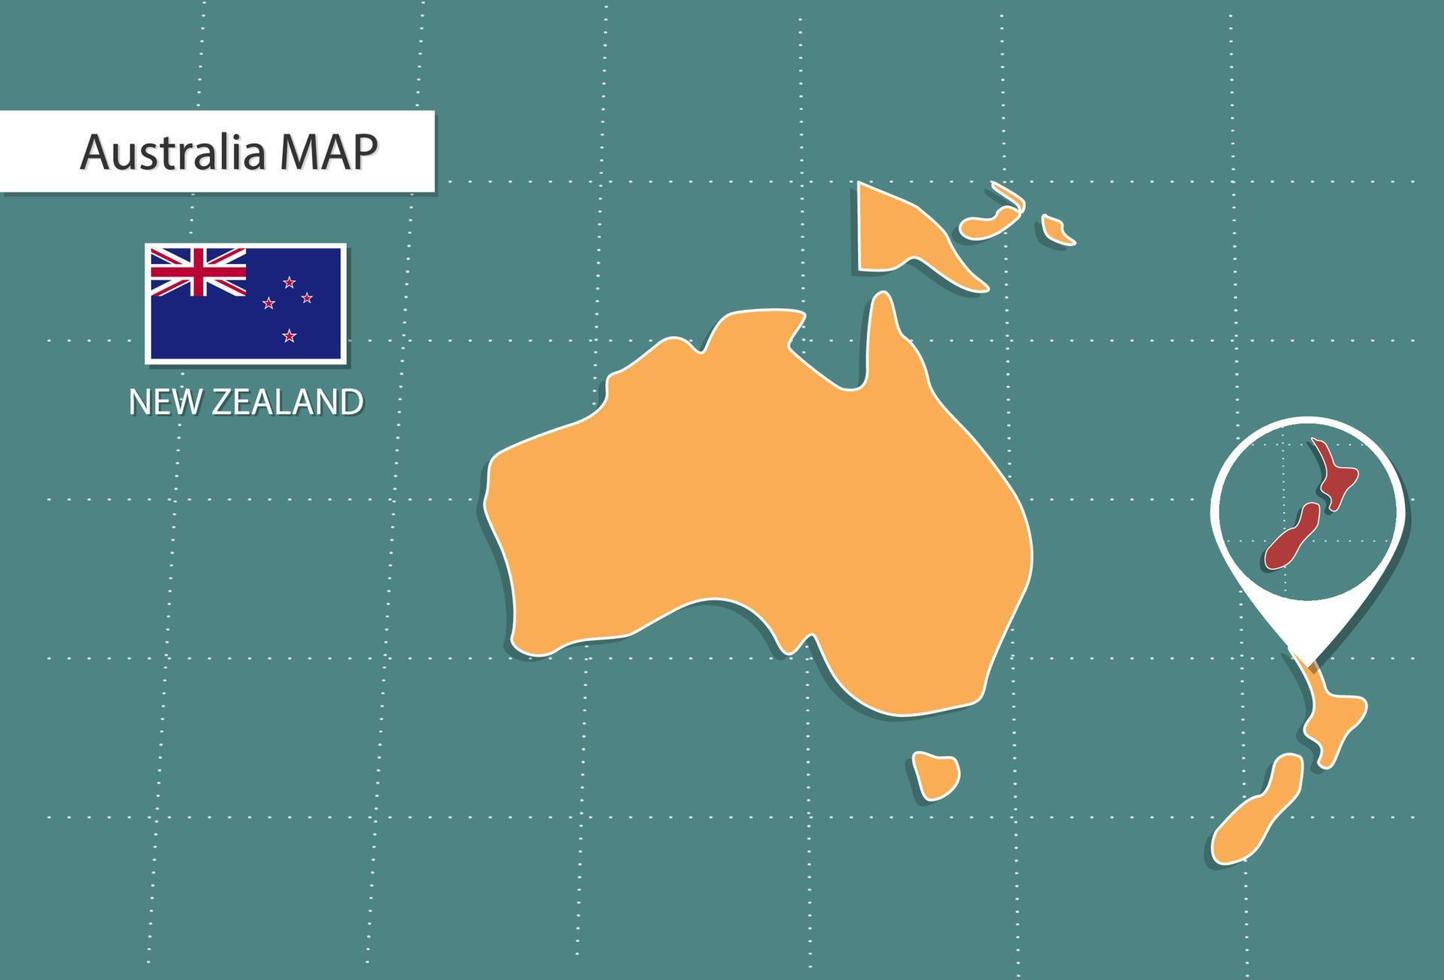 New Zealand map in Australia zoom version, icons showing New Zealand location and flags. vector